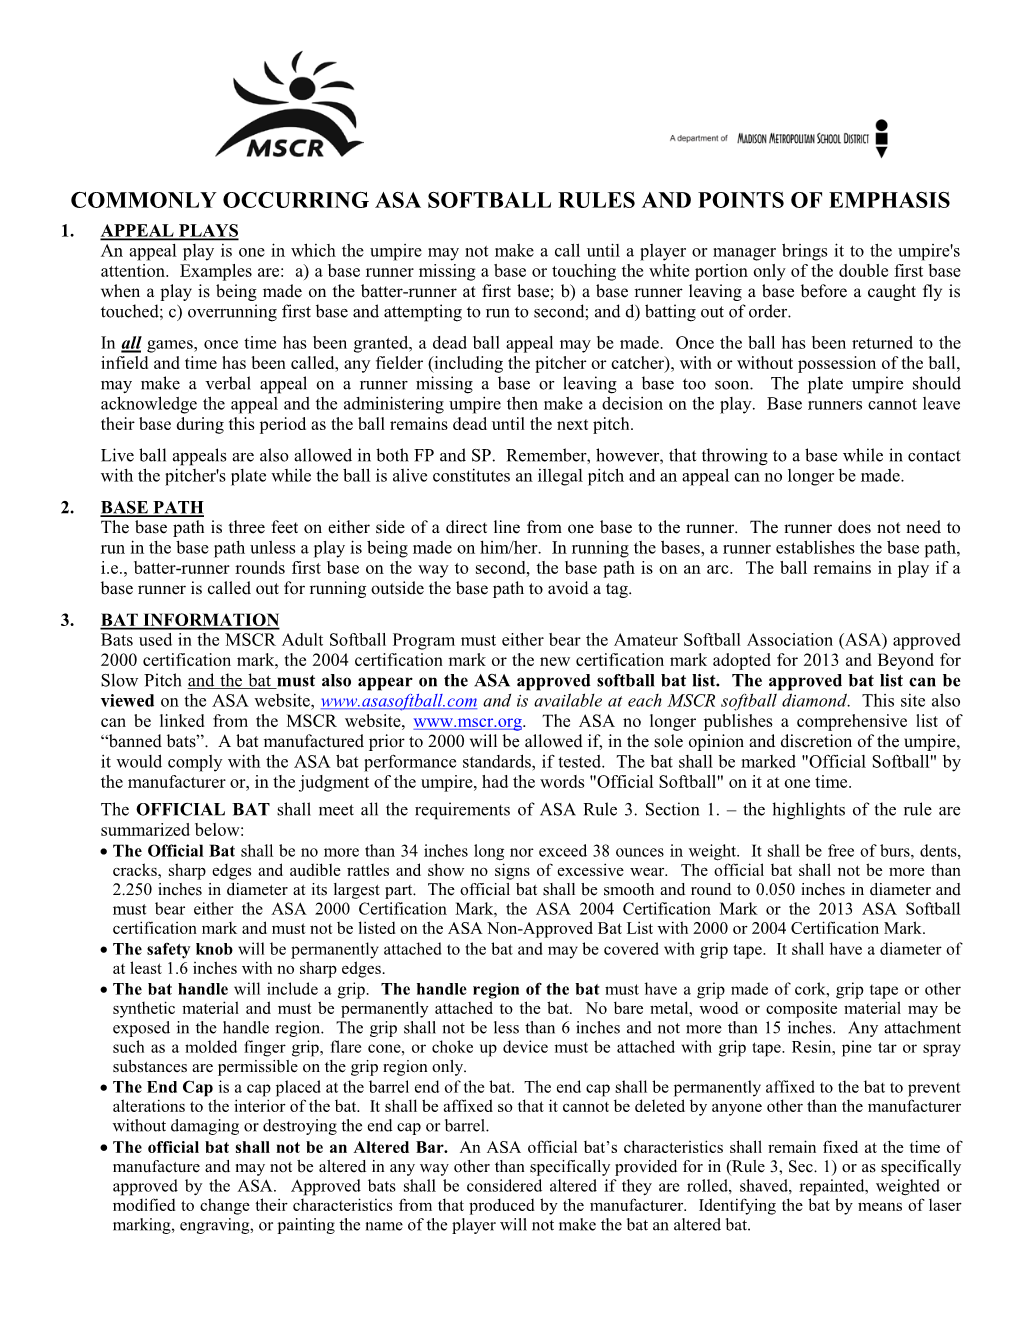 Commonly Occurring Asa Softball Rules and Points of Emphasis